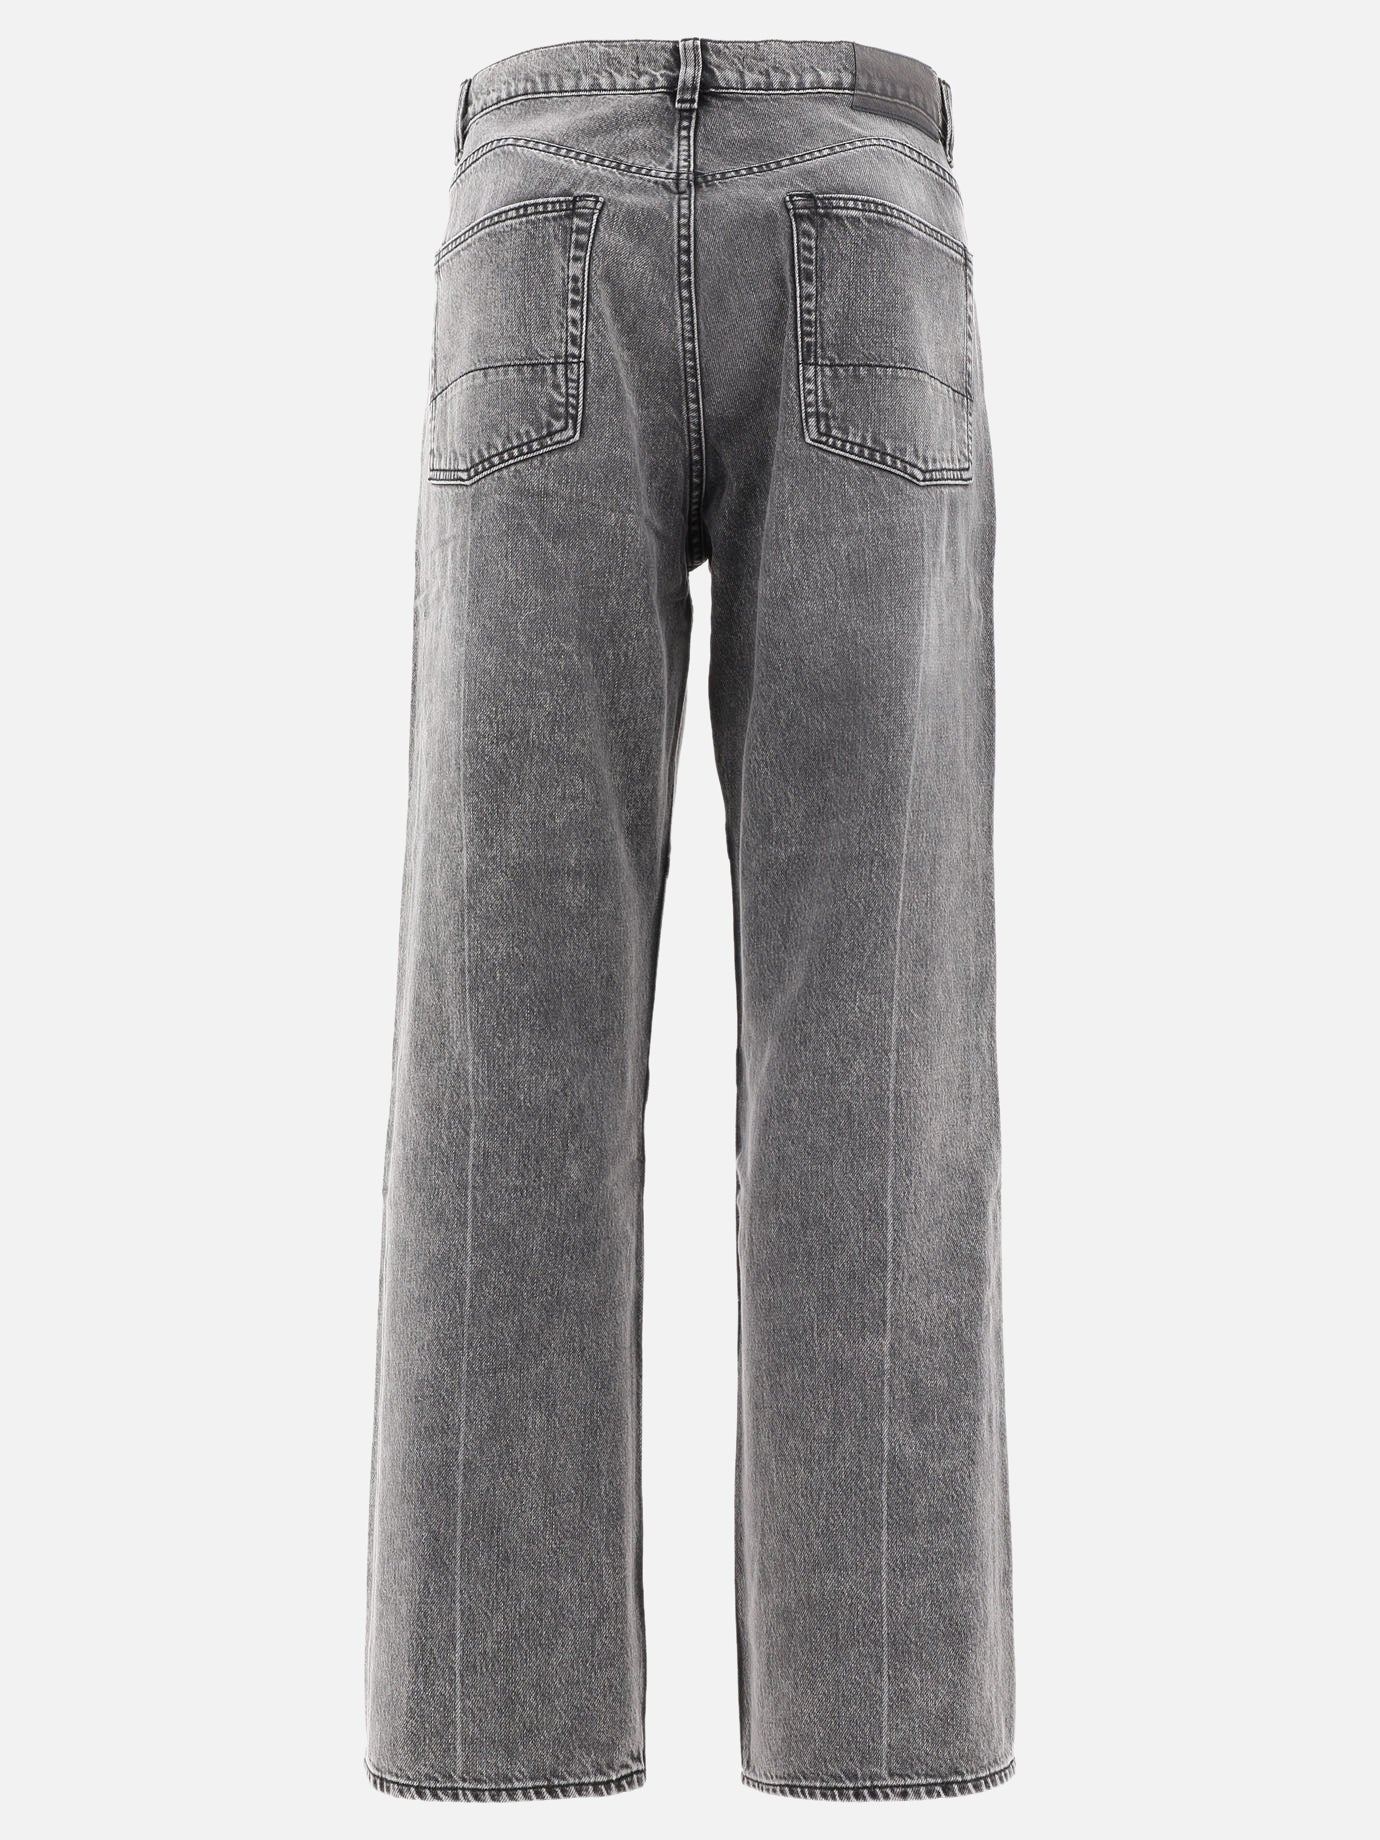 "Extended Third Cut" jeans